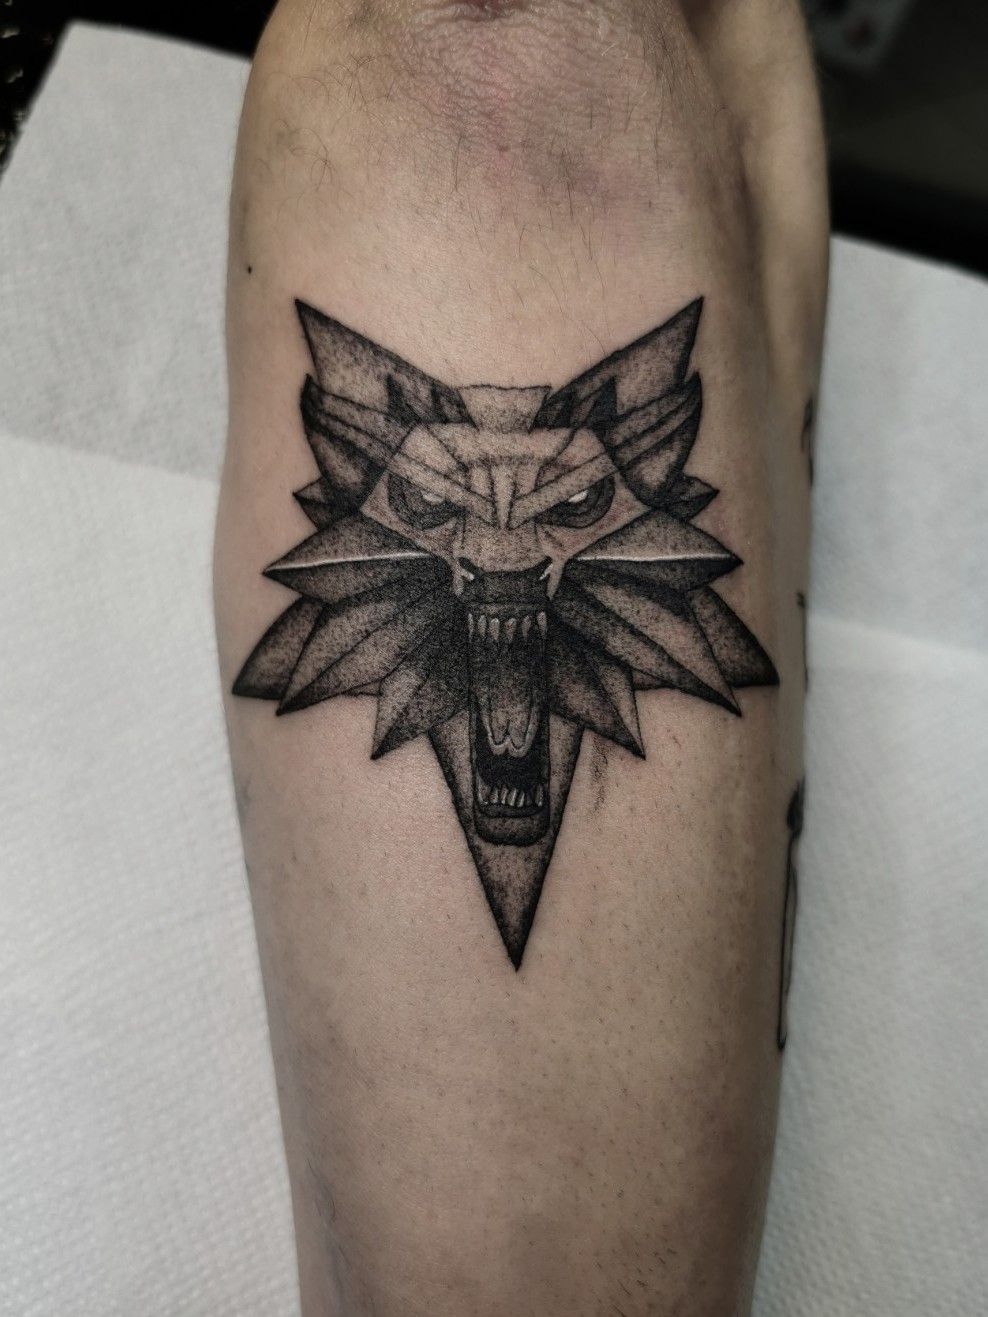 101 Amazing Witcher Tattoo Ideas That Will Blow Your Mind  Witcher tattoo  Gaming tattoo Tattoos